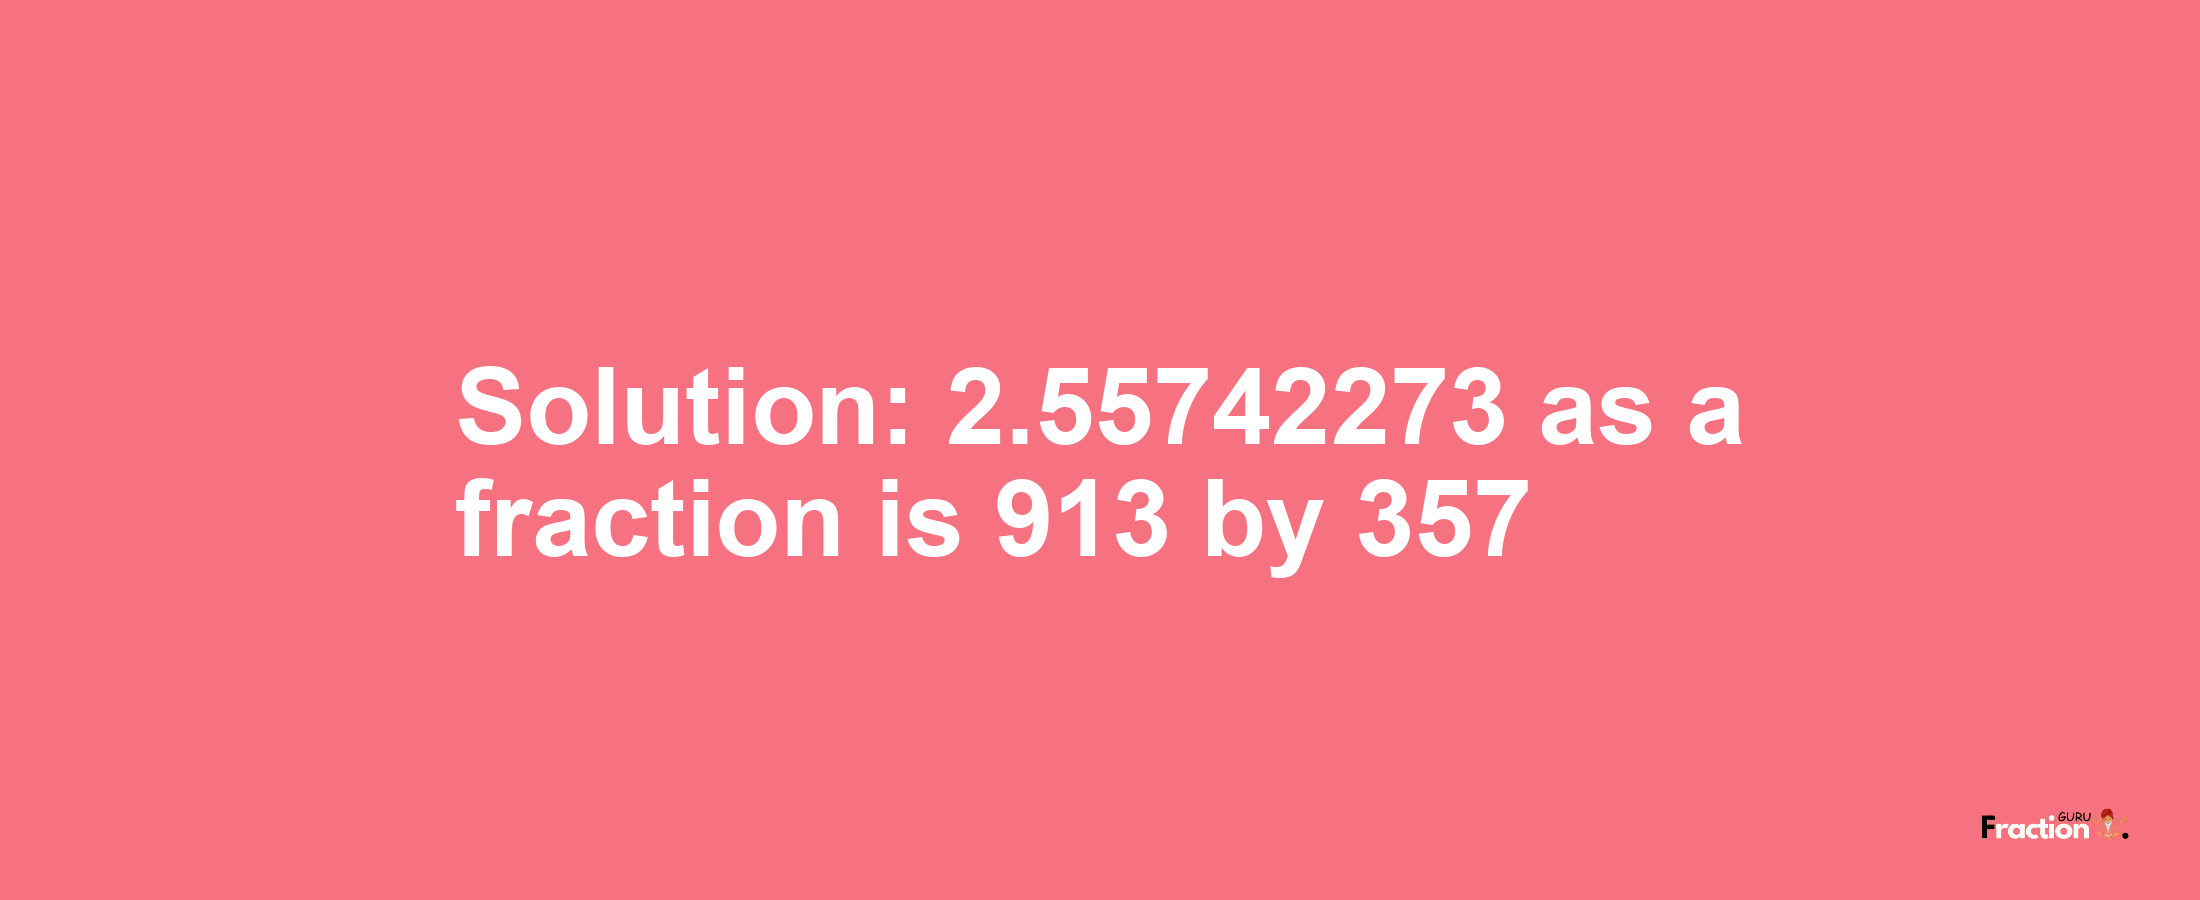 Solution:2.55742273 as a fraction is 913/357